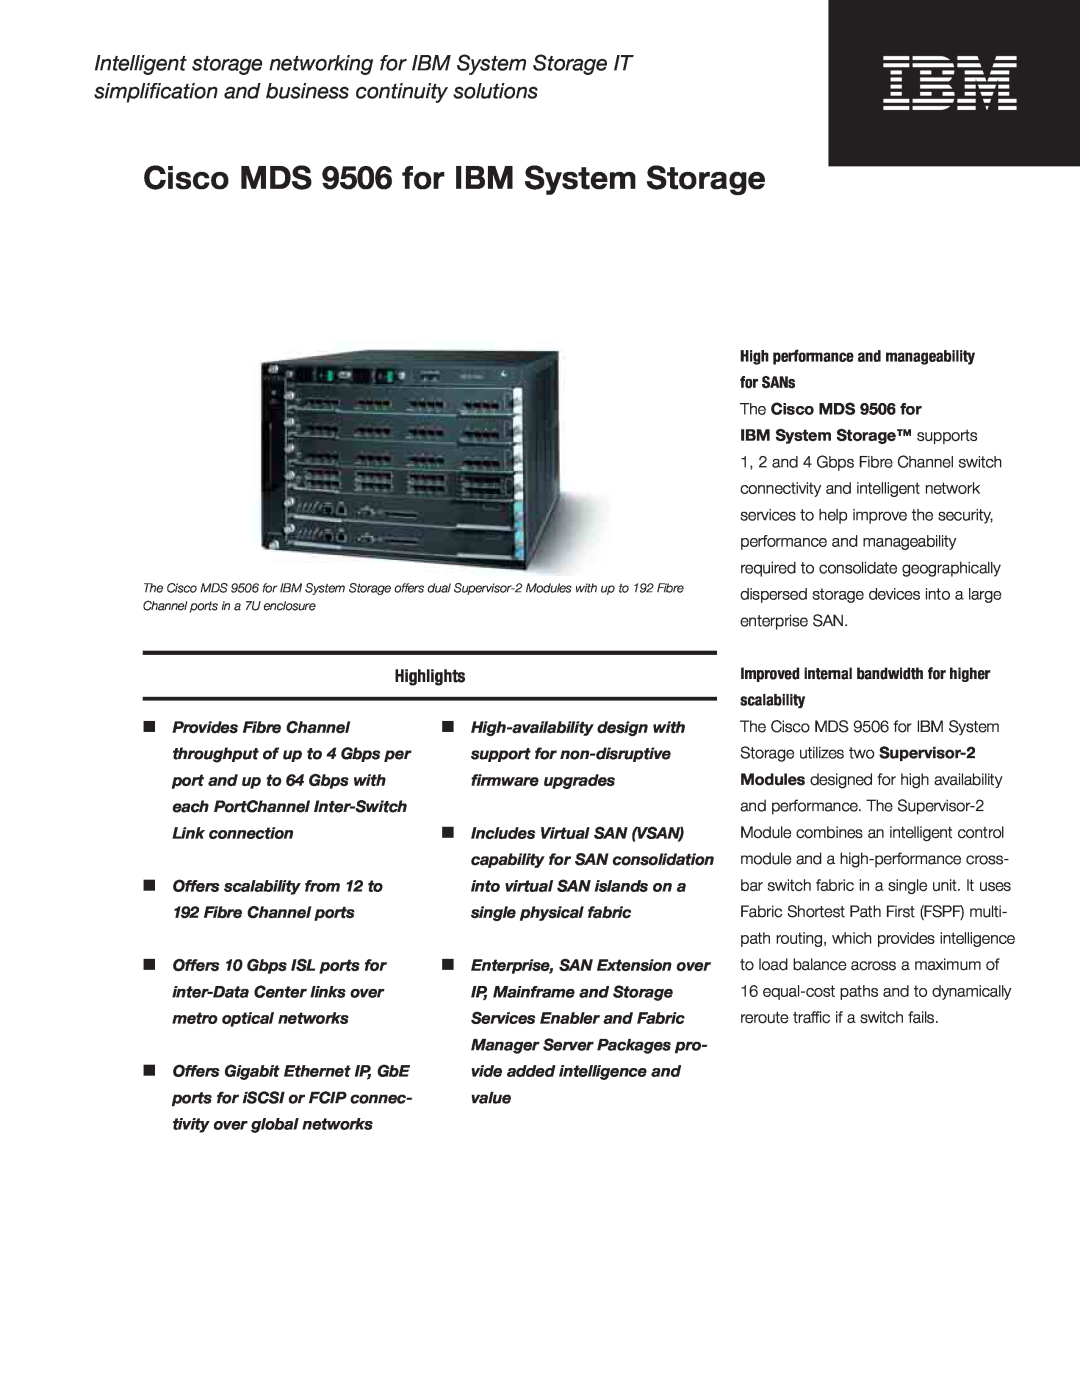 IBM manual Highlights, High performance and manageability for SANs The Cisco MDS 9506 for, IBM System Storage supports 